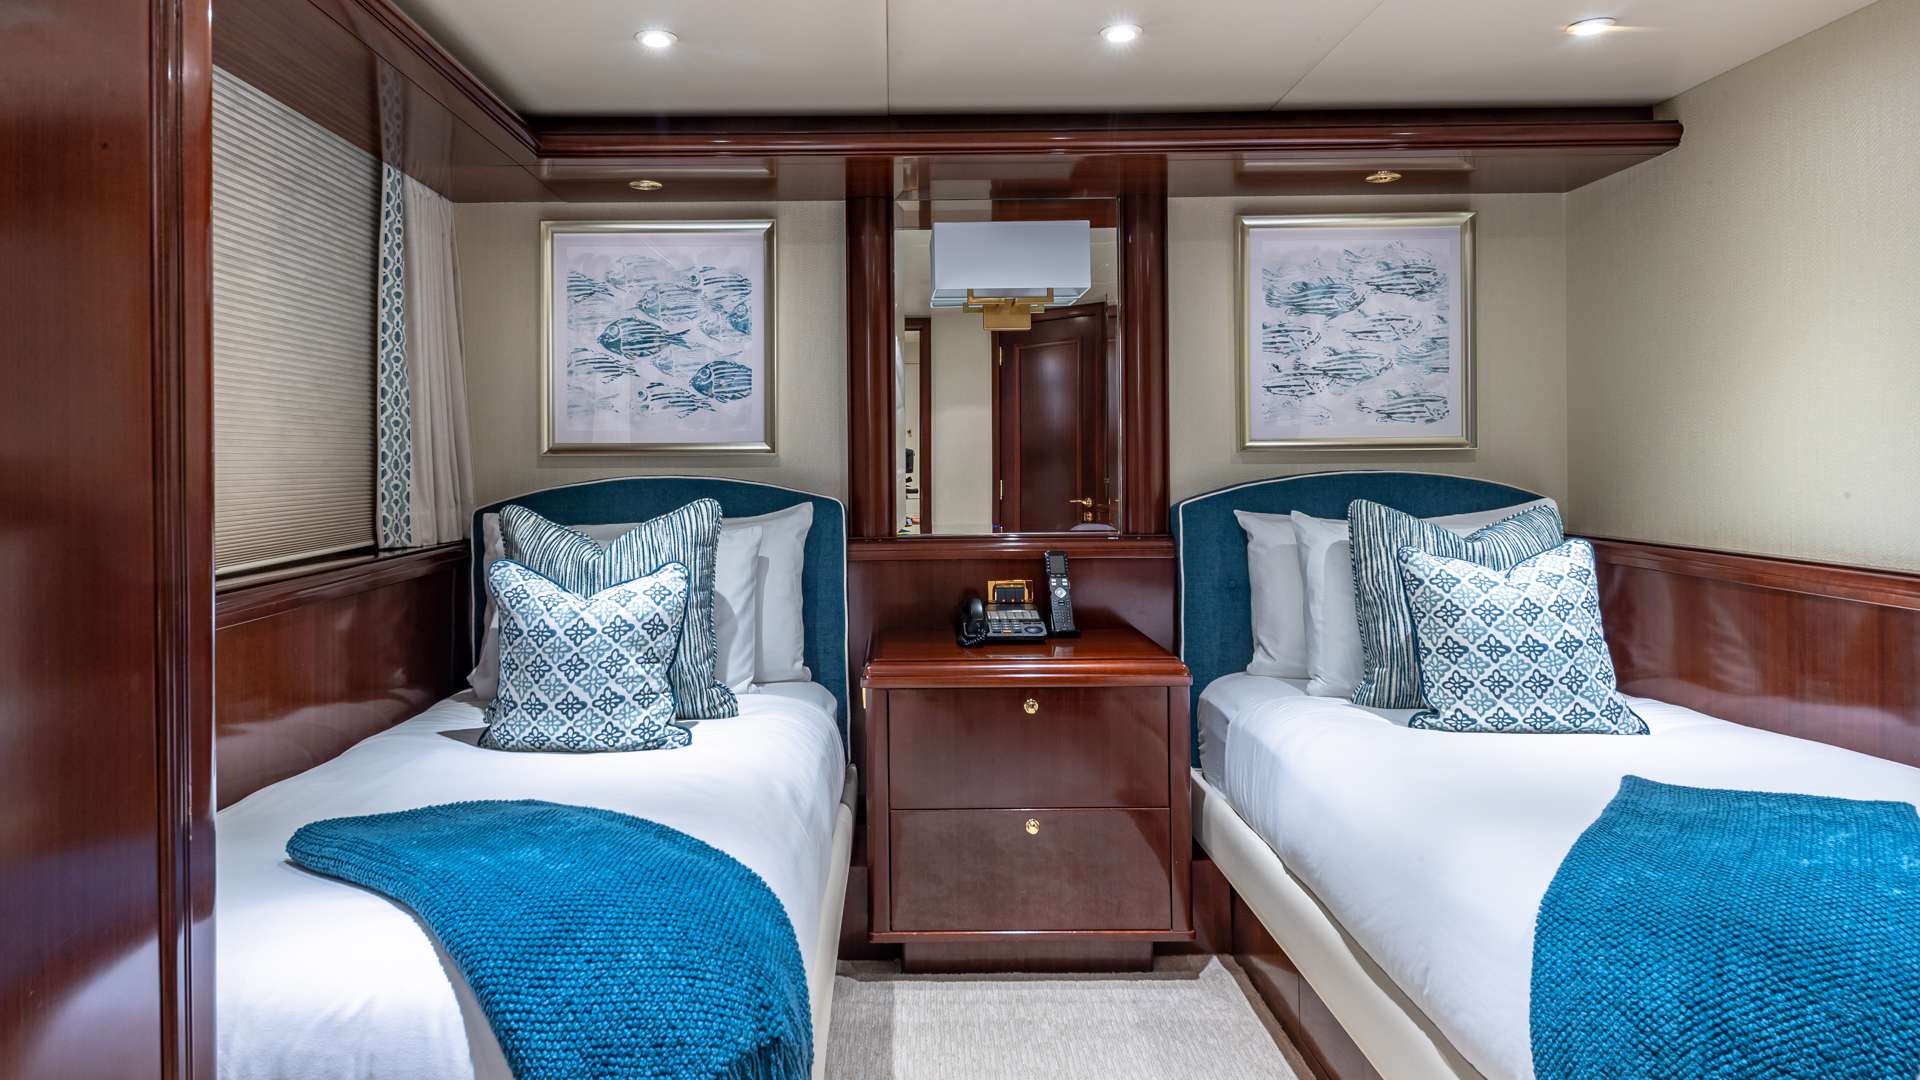 Motor Yacht 'STARSHIP' Guest Twin Stateroom, 12 PAX, 9 Crew, 143.00 Ft, 43.00 Meters, Built 1988, Van Mill, Refit Year 2017